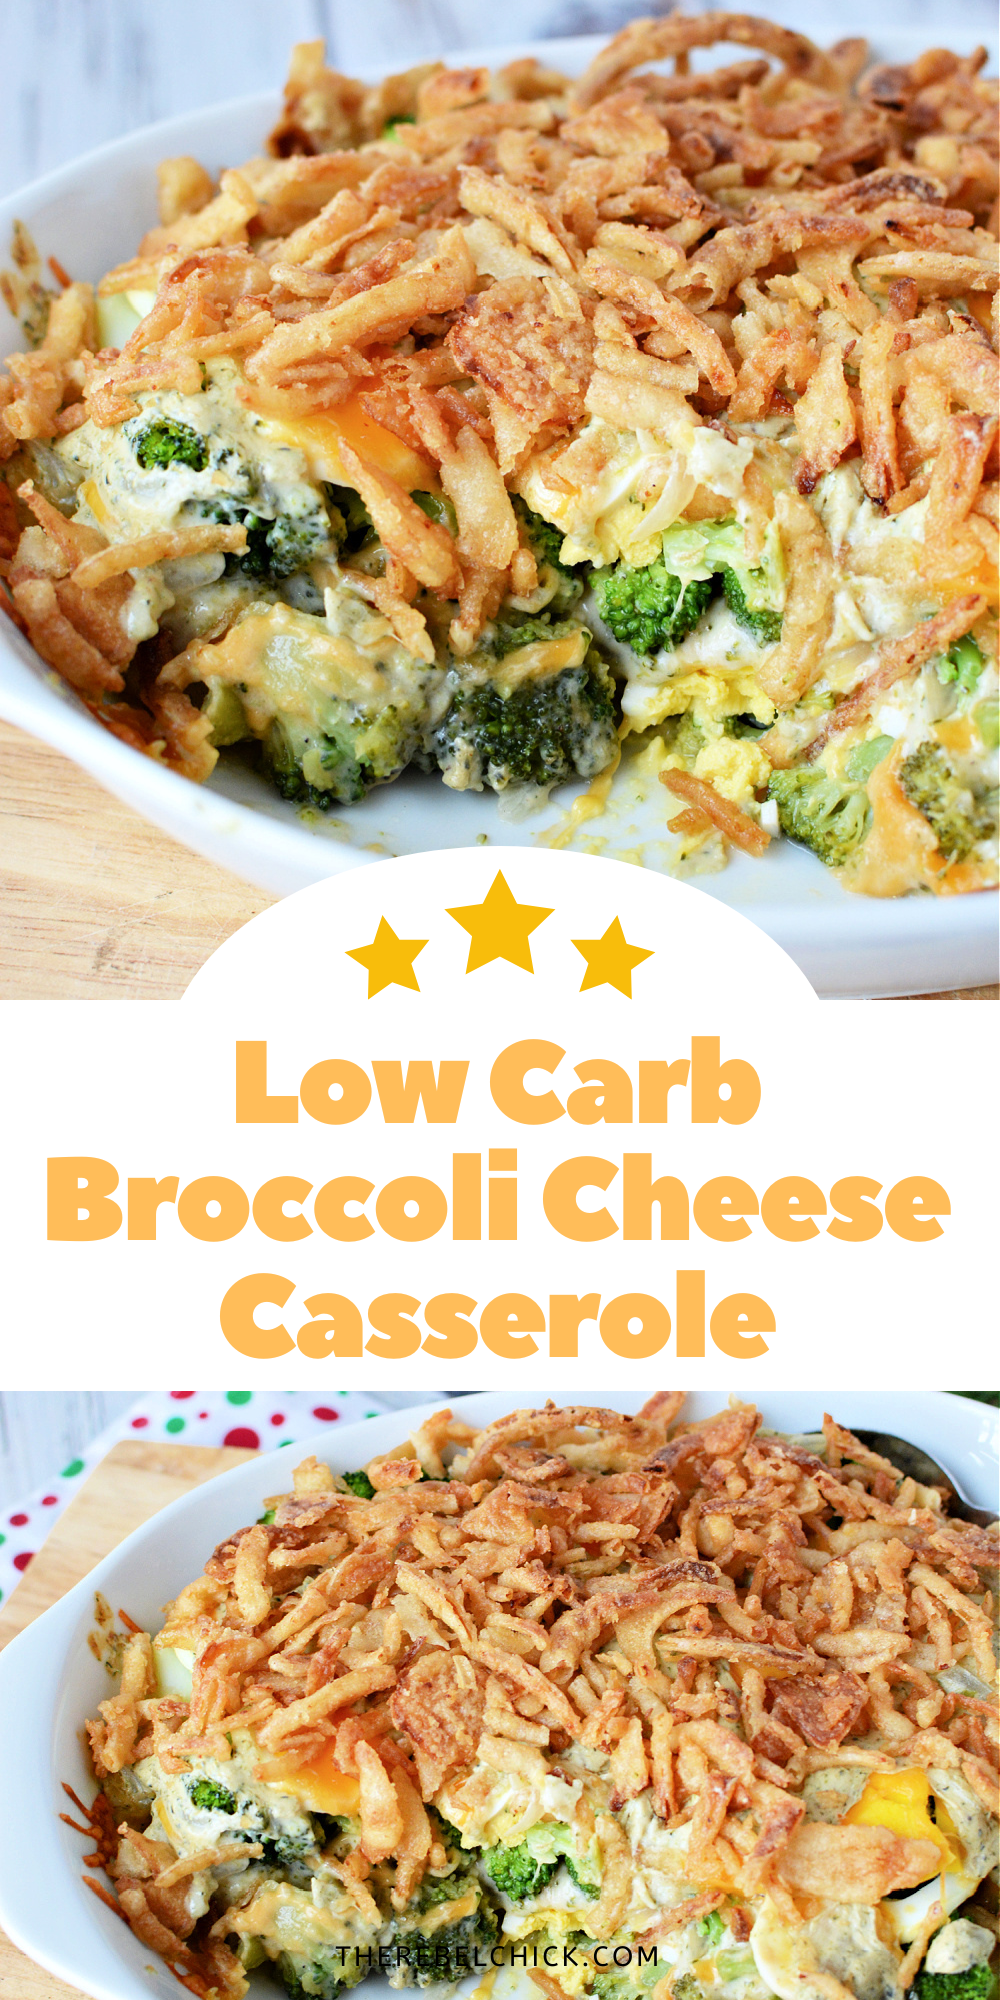 How to Make a Low Carb Broccoli Cheese Bake Recipe